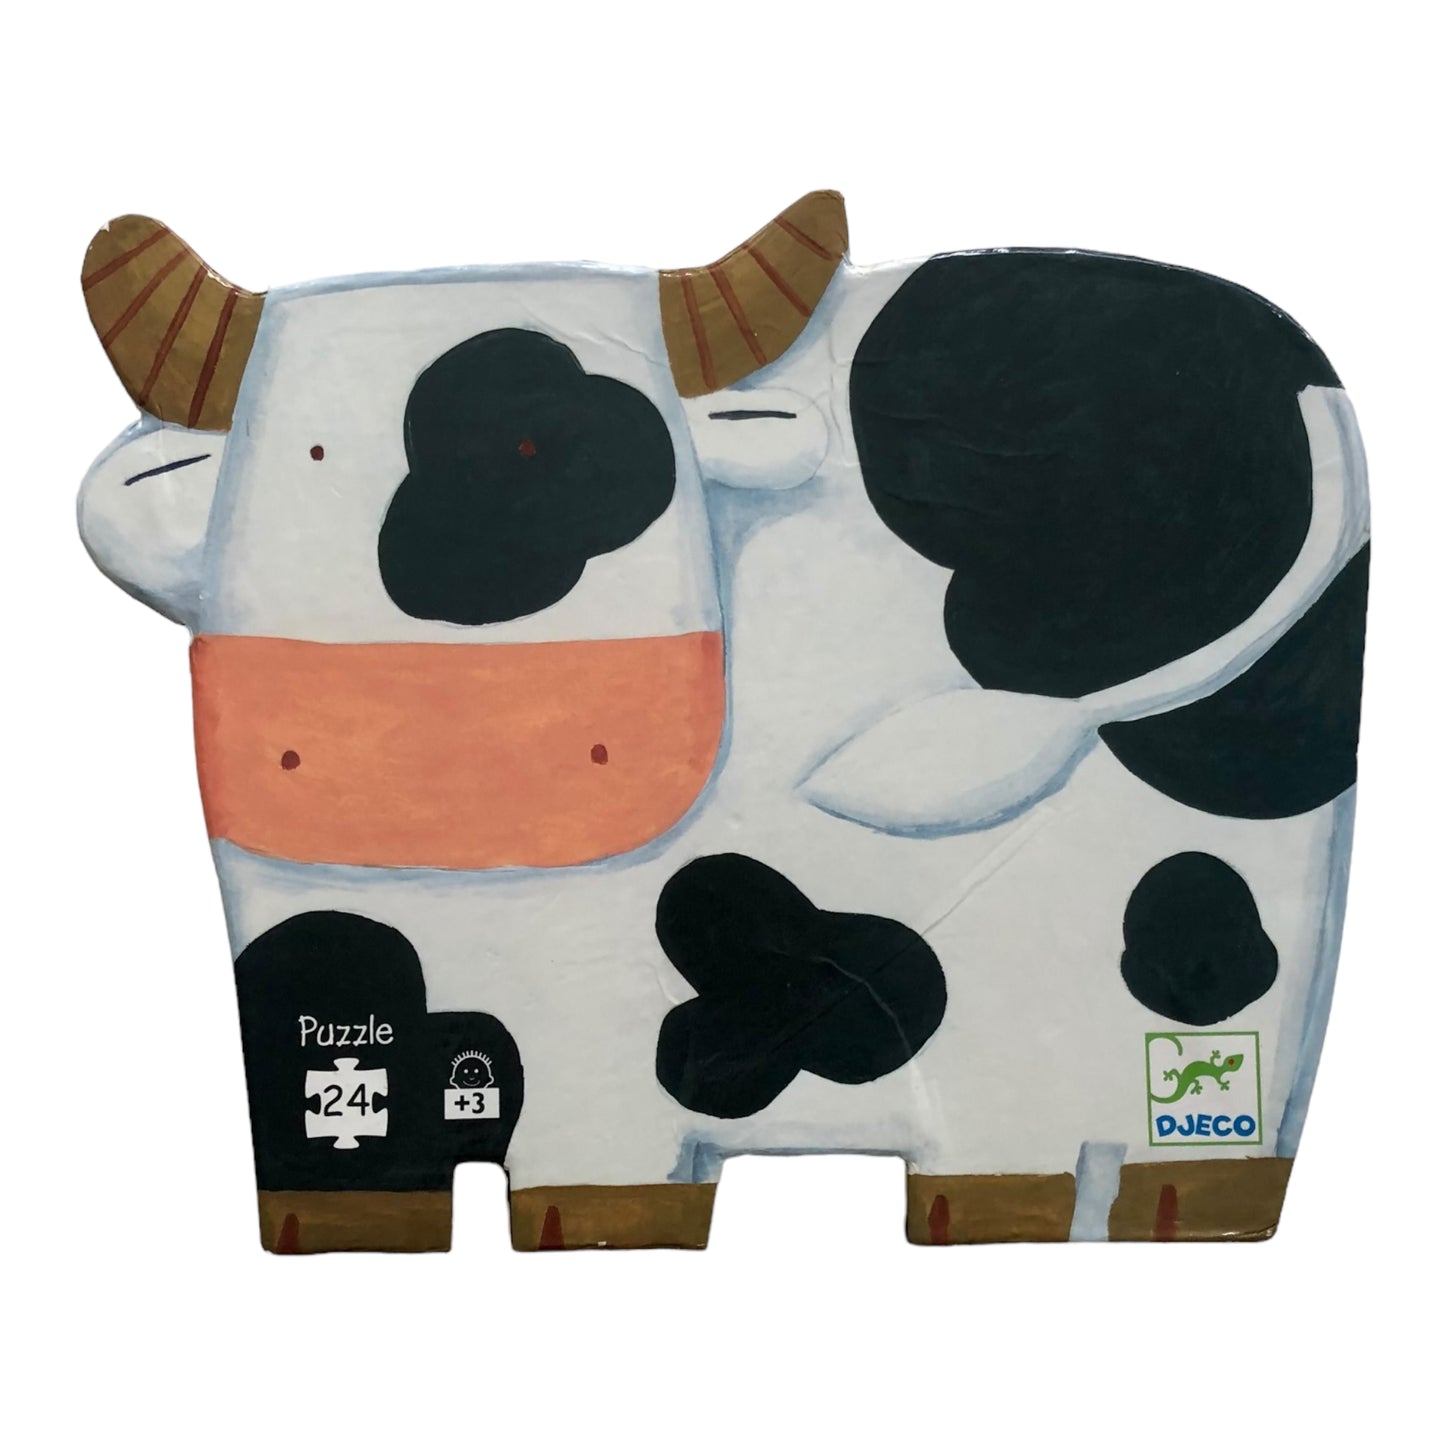 Djeco - The cows on the farm, silhouette puzzle - 24 pieces